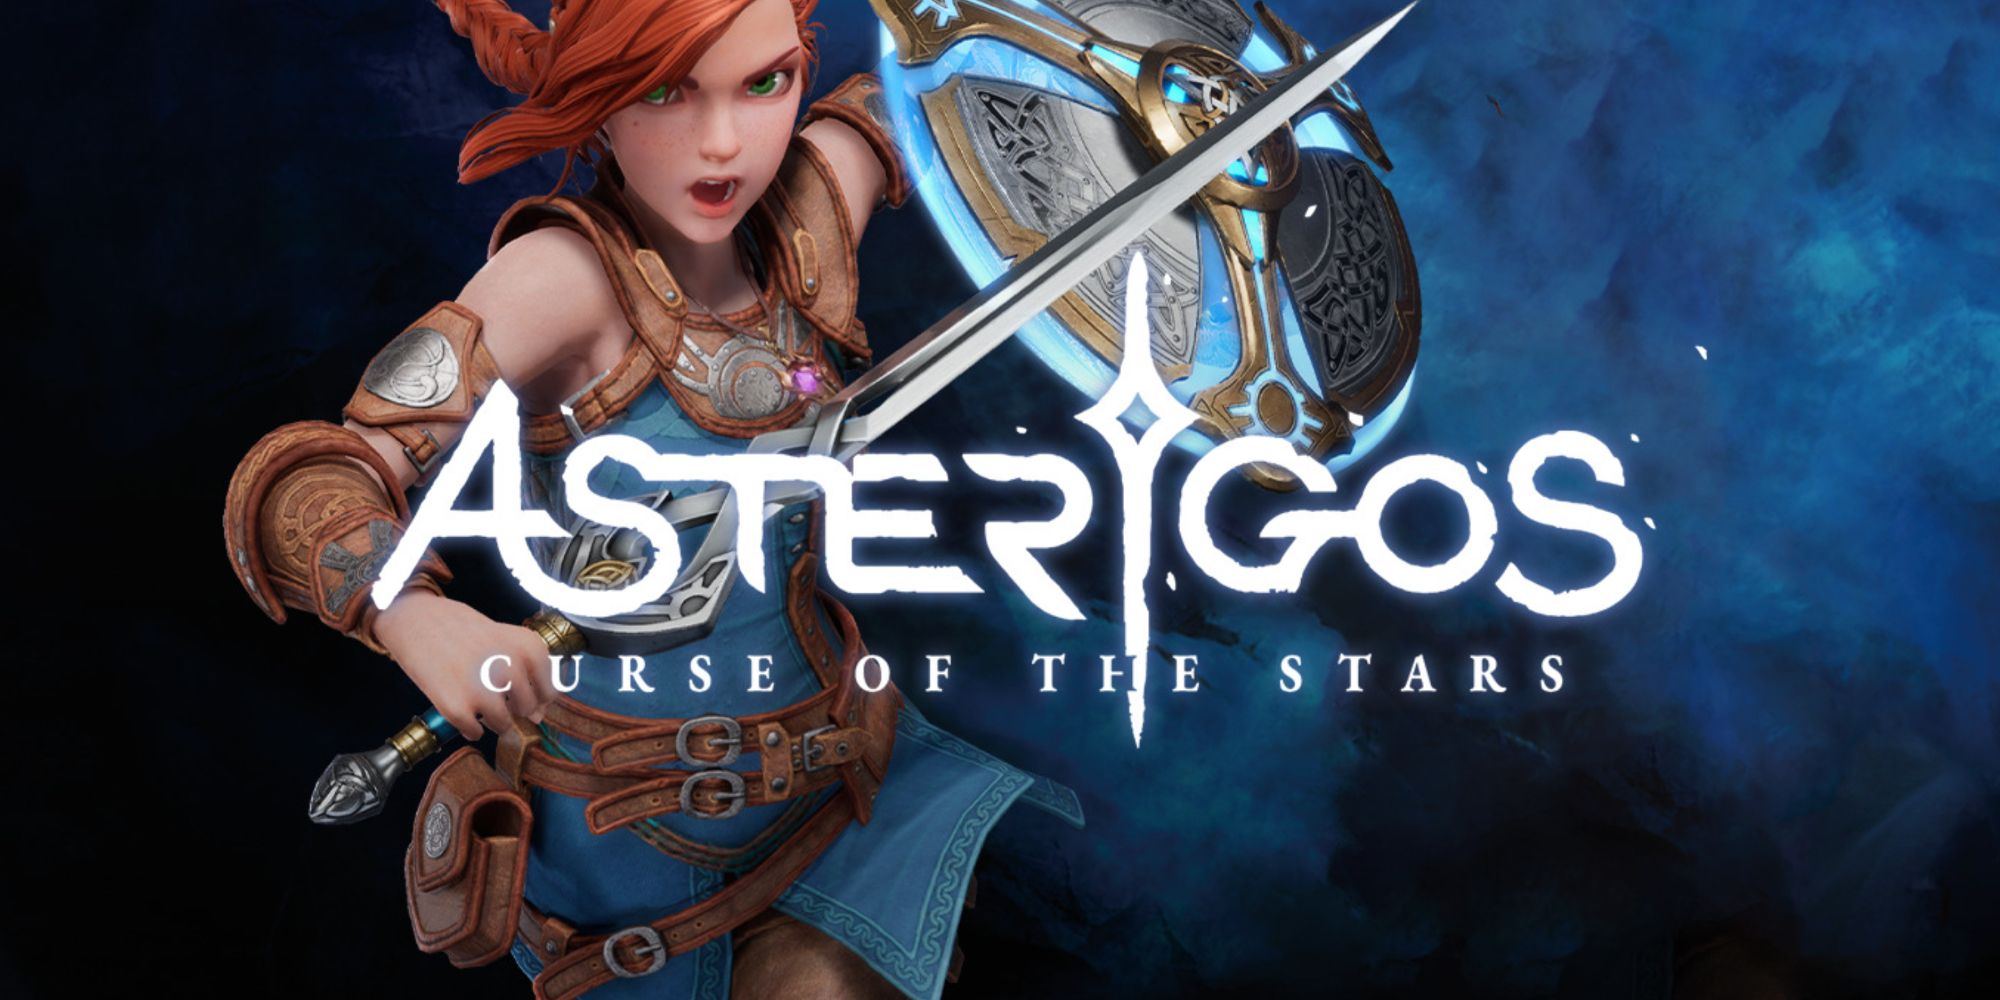 download the last version for ipod Asterigos: Curse of the Stars